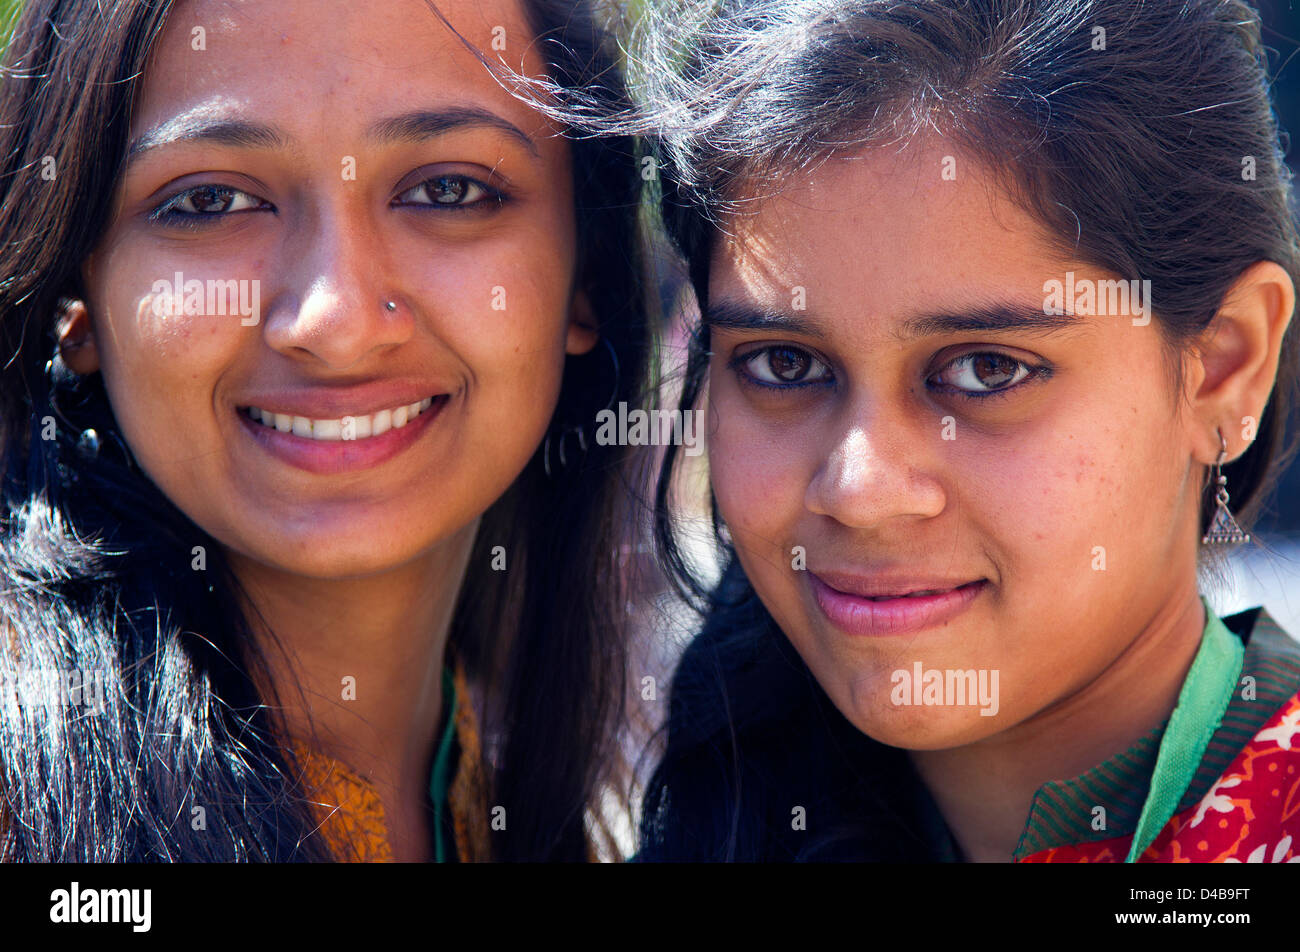 Two happy Indian girls Stock Photo